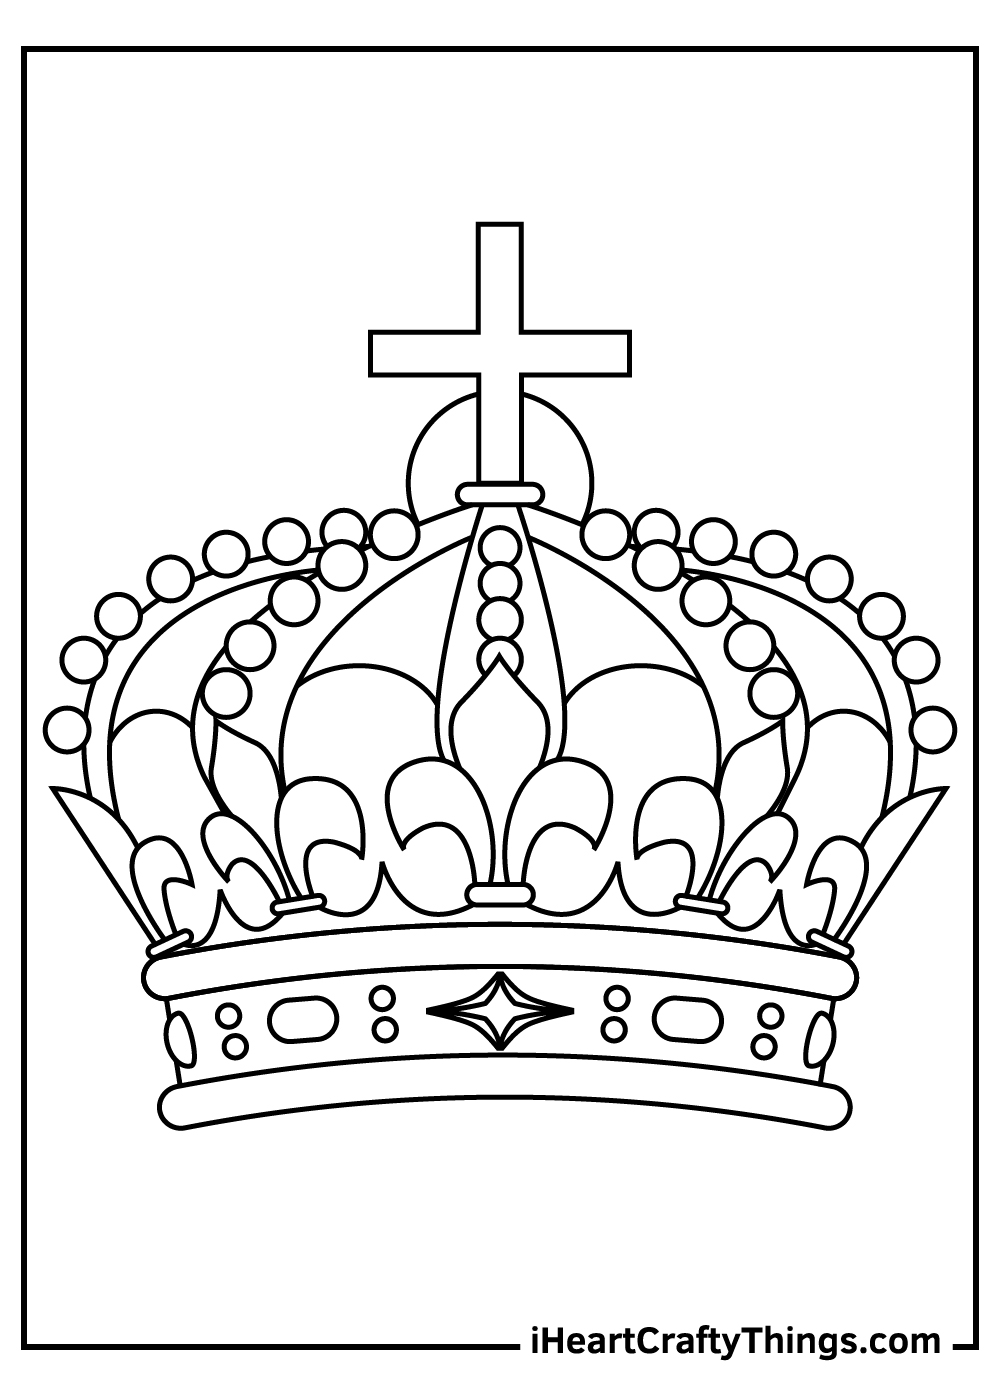 Crown coloring pages free printables